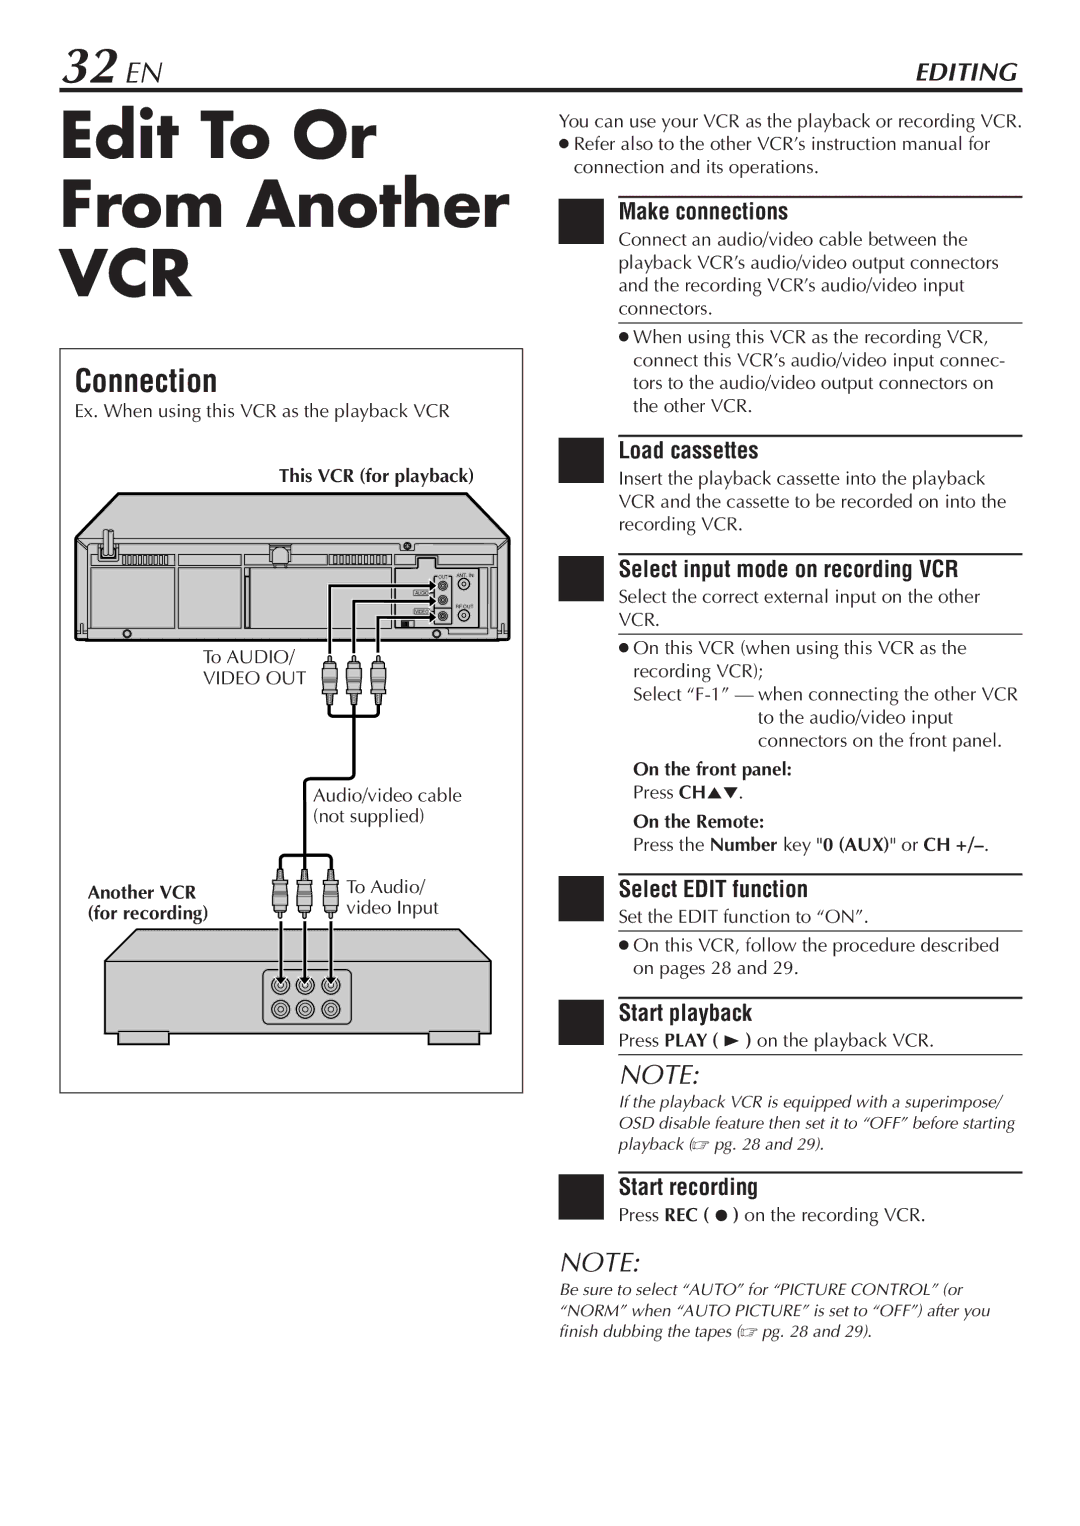 JVC HR-A56U manual Edit To Or From Another, 32 EN, Connection 